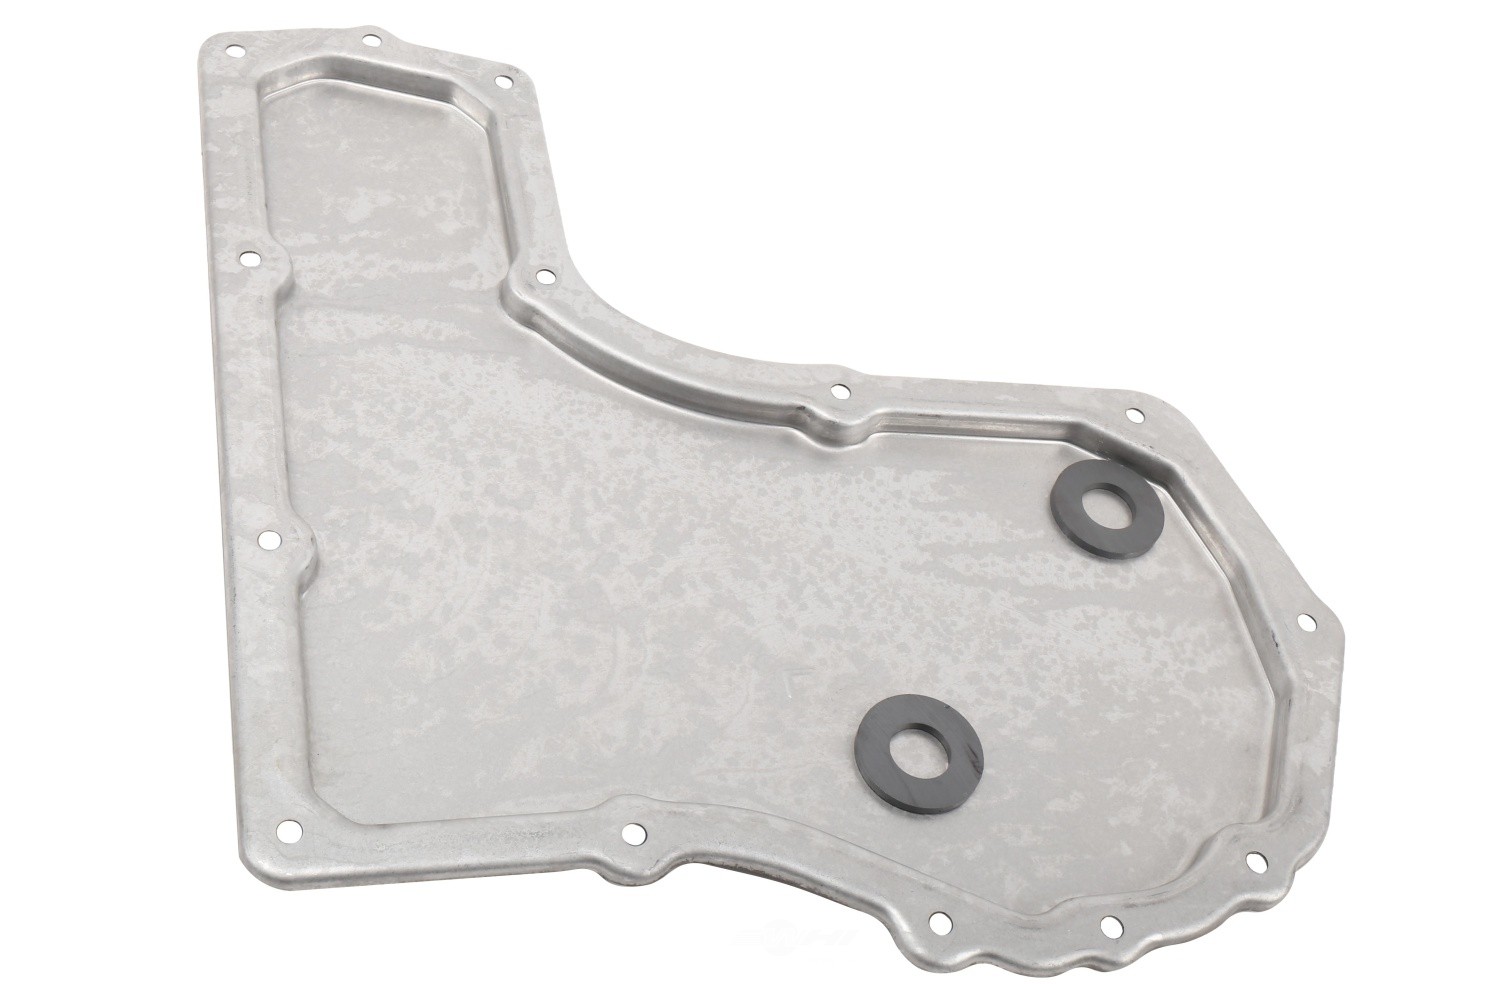 GM GENUINE PARTS - Automatic Transmission Oil Pan - GMP 8685184